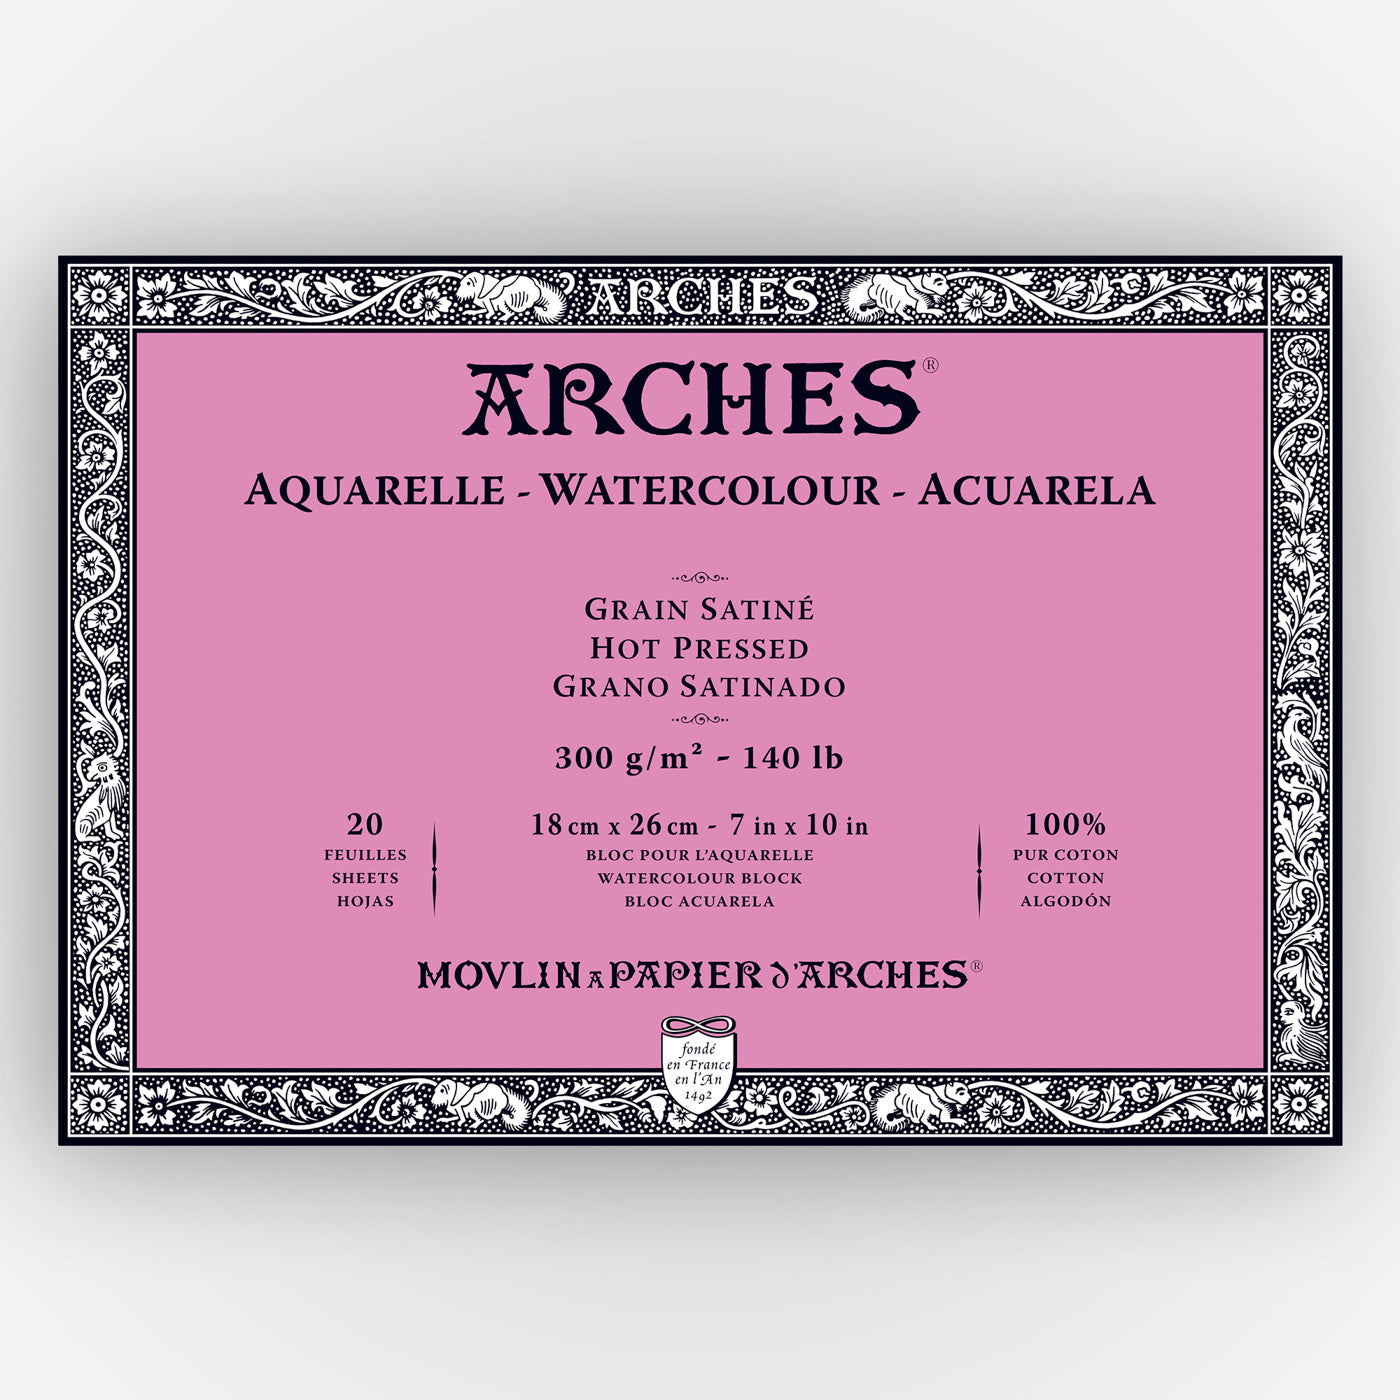 Arches Hot Pressed 300g 18x26cm 20 sheets